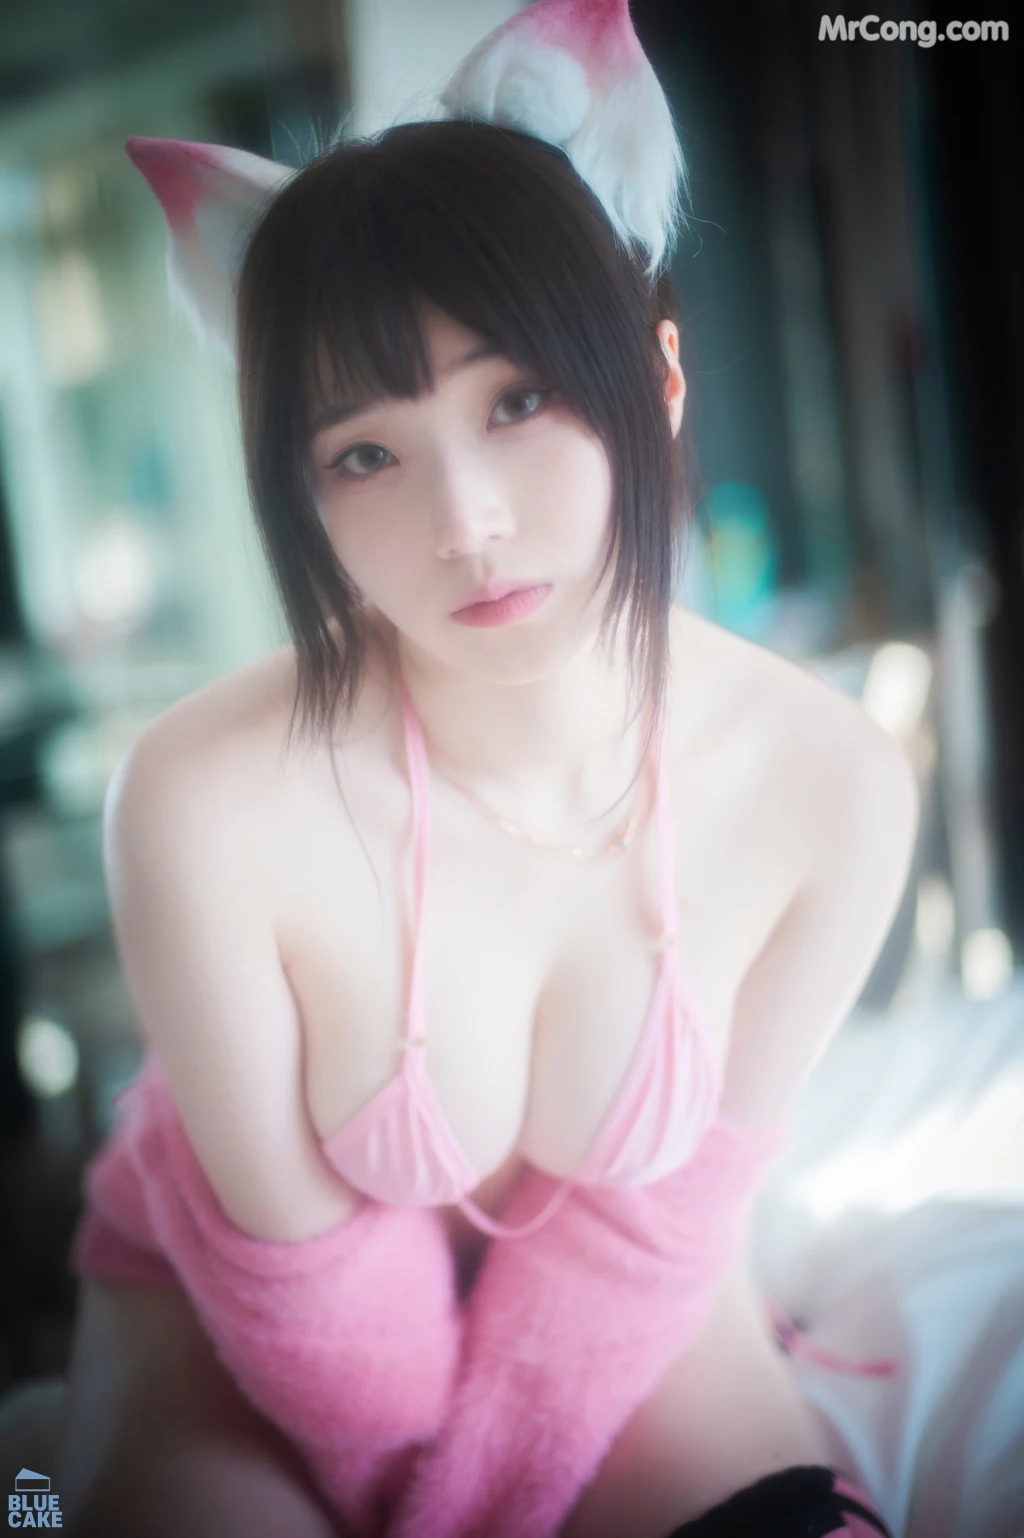 [BLUECAKE] Bambi (밤비): Naughty Cats Pink & Mint RED (145 photos)